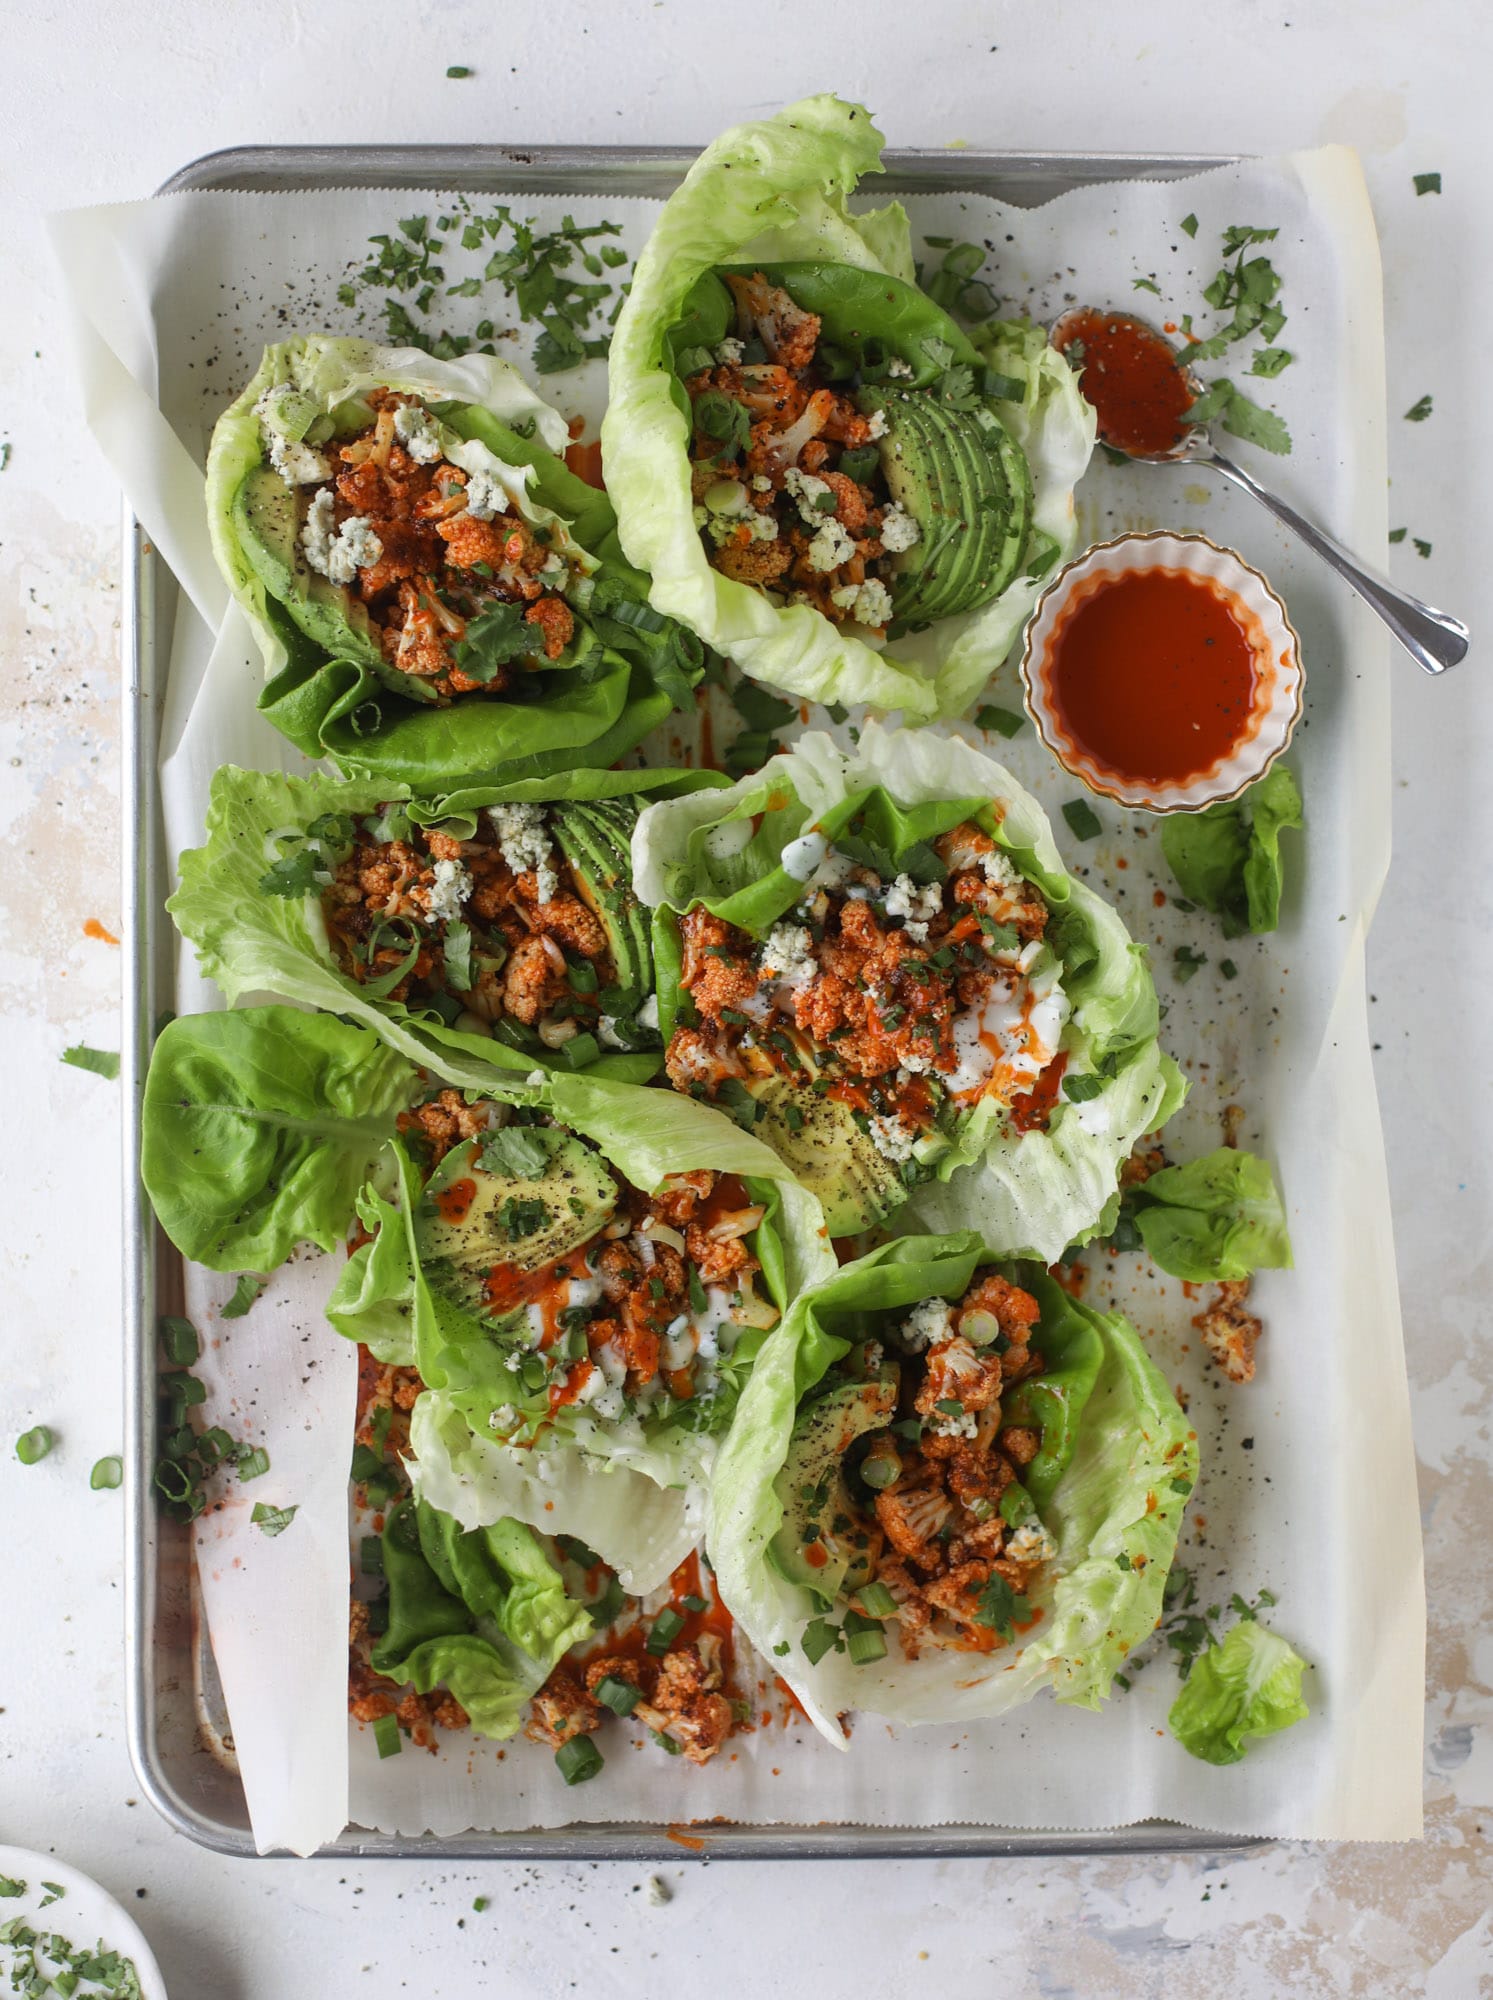 These buffalo cauliflower lettuce wraps are perfect for game day or even a quick weeknight dinner. Roasted cauliflower with buffalo wing sauce, sliced avocado, crumbled blue cheese, scallions, cilantro and chives makes for a flavor explosion! I howsweeteats.com #buffalo #cauliflower